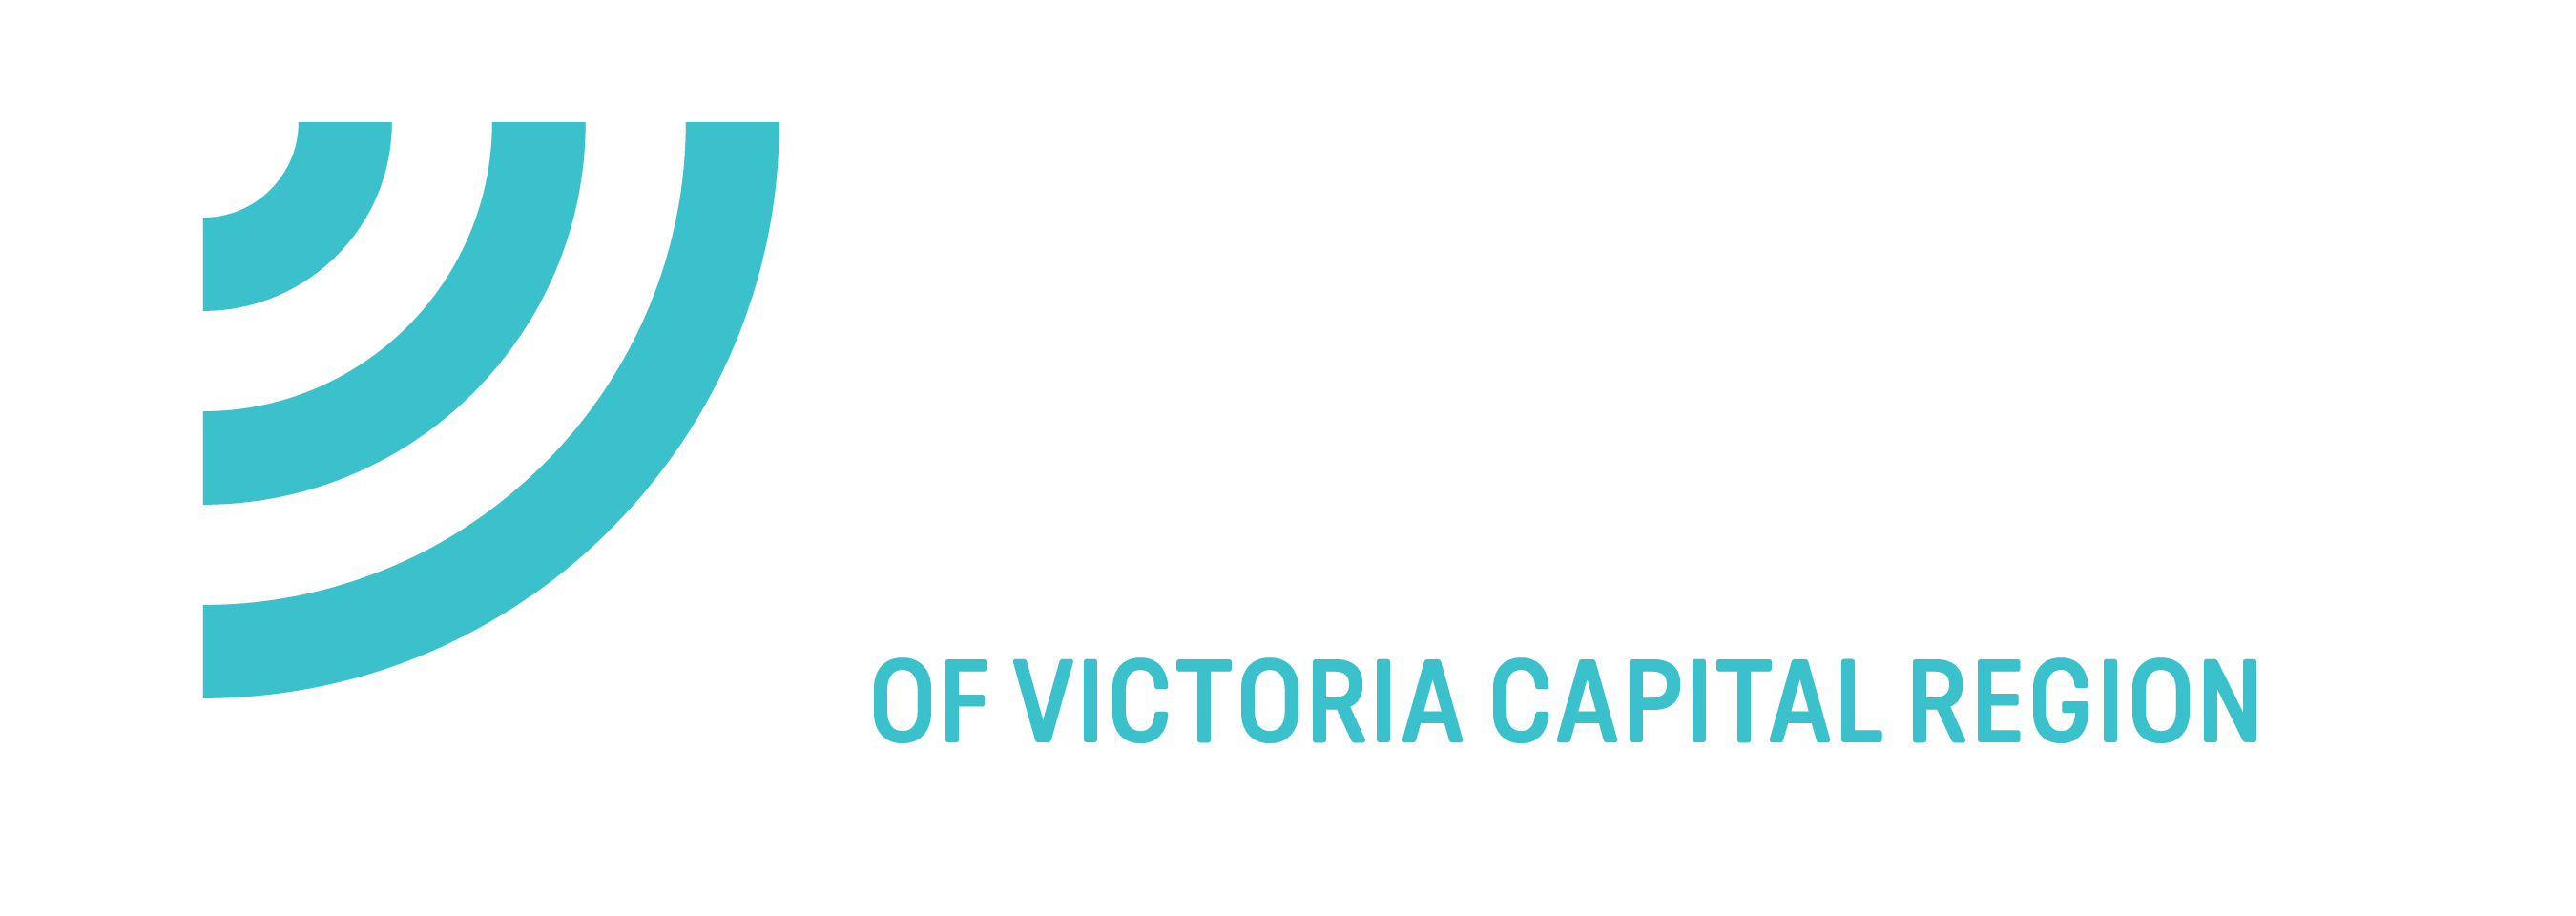 Bowl for Kids' Sake Raffles - Find out who won! - Big Brothers Big Sisters of Victoria Capital Region